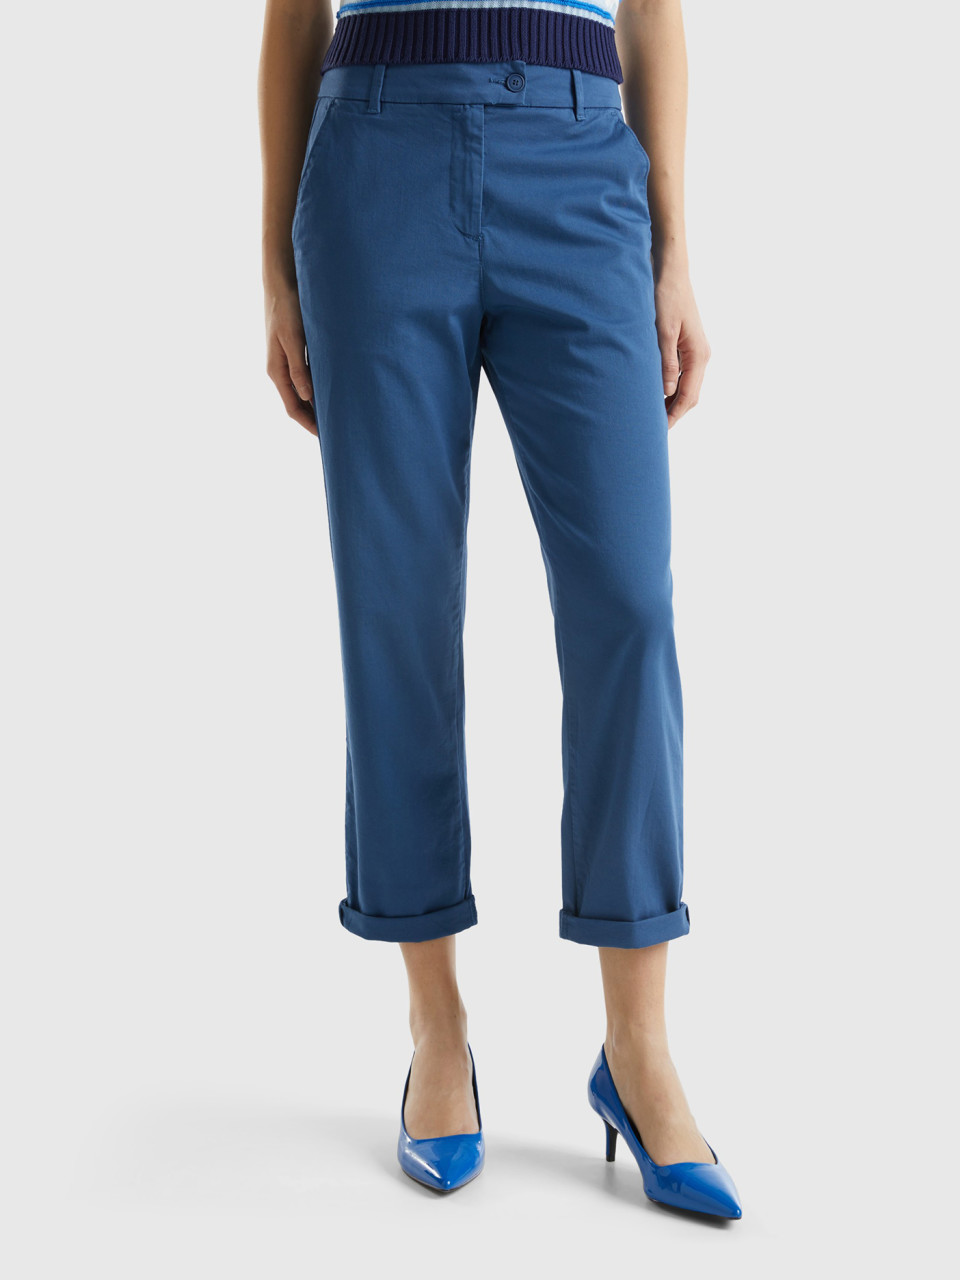 Benetton, Stretch Cotton Chino Trousers, Air Force Blue, Women